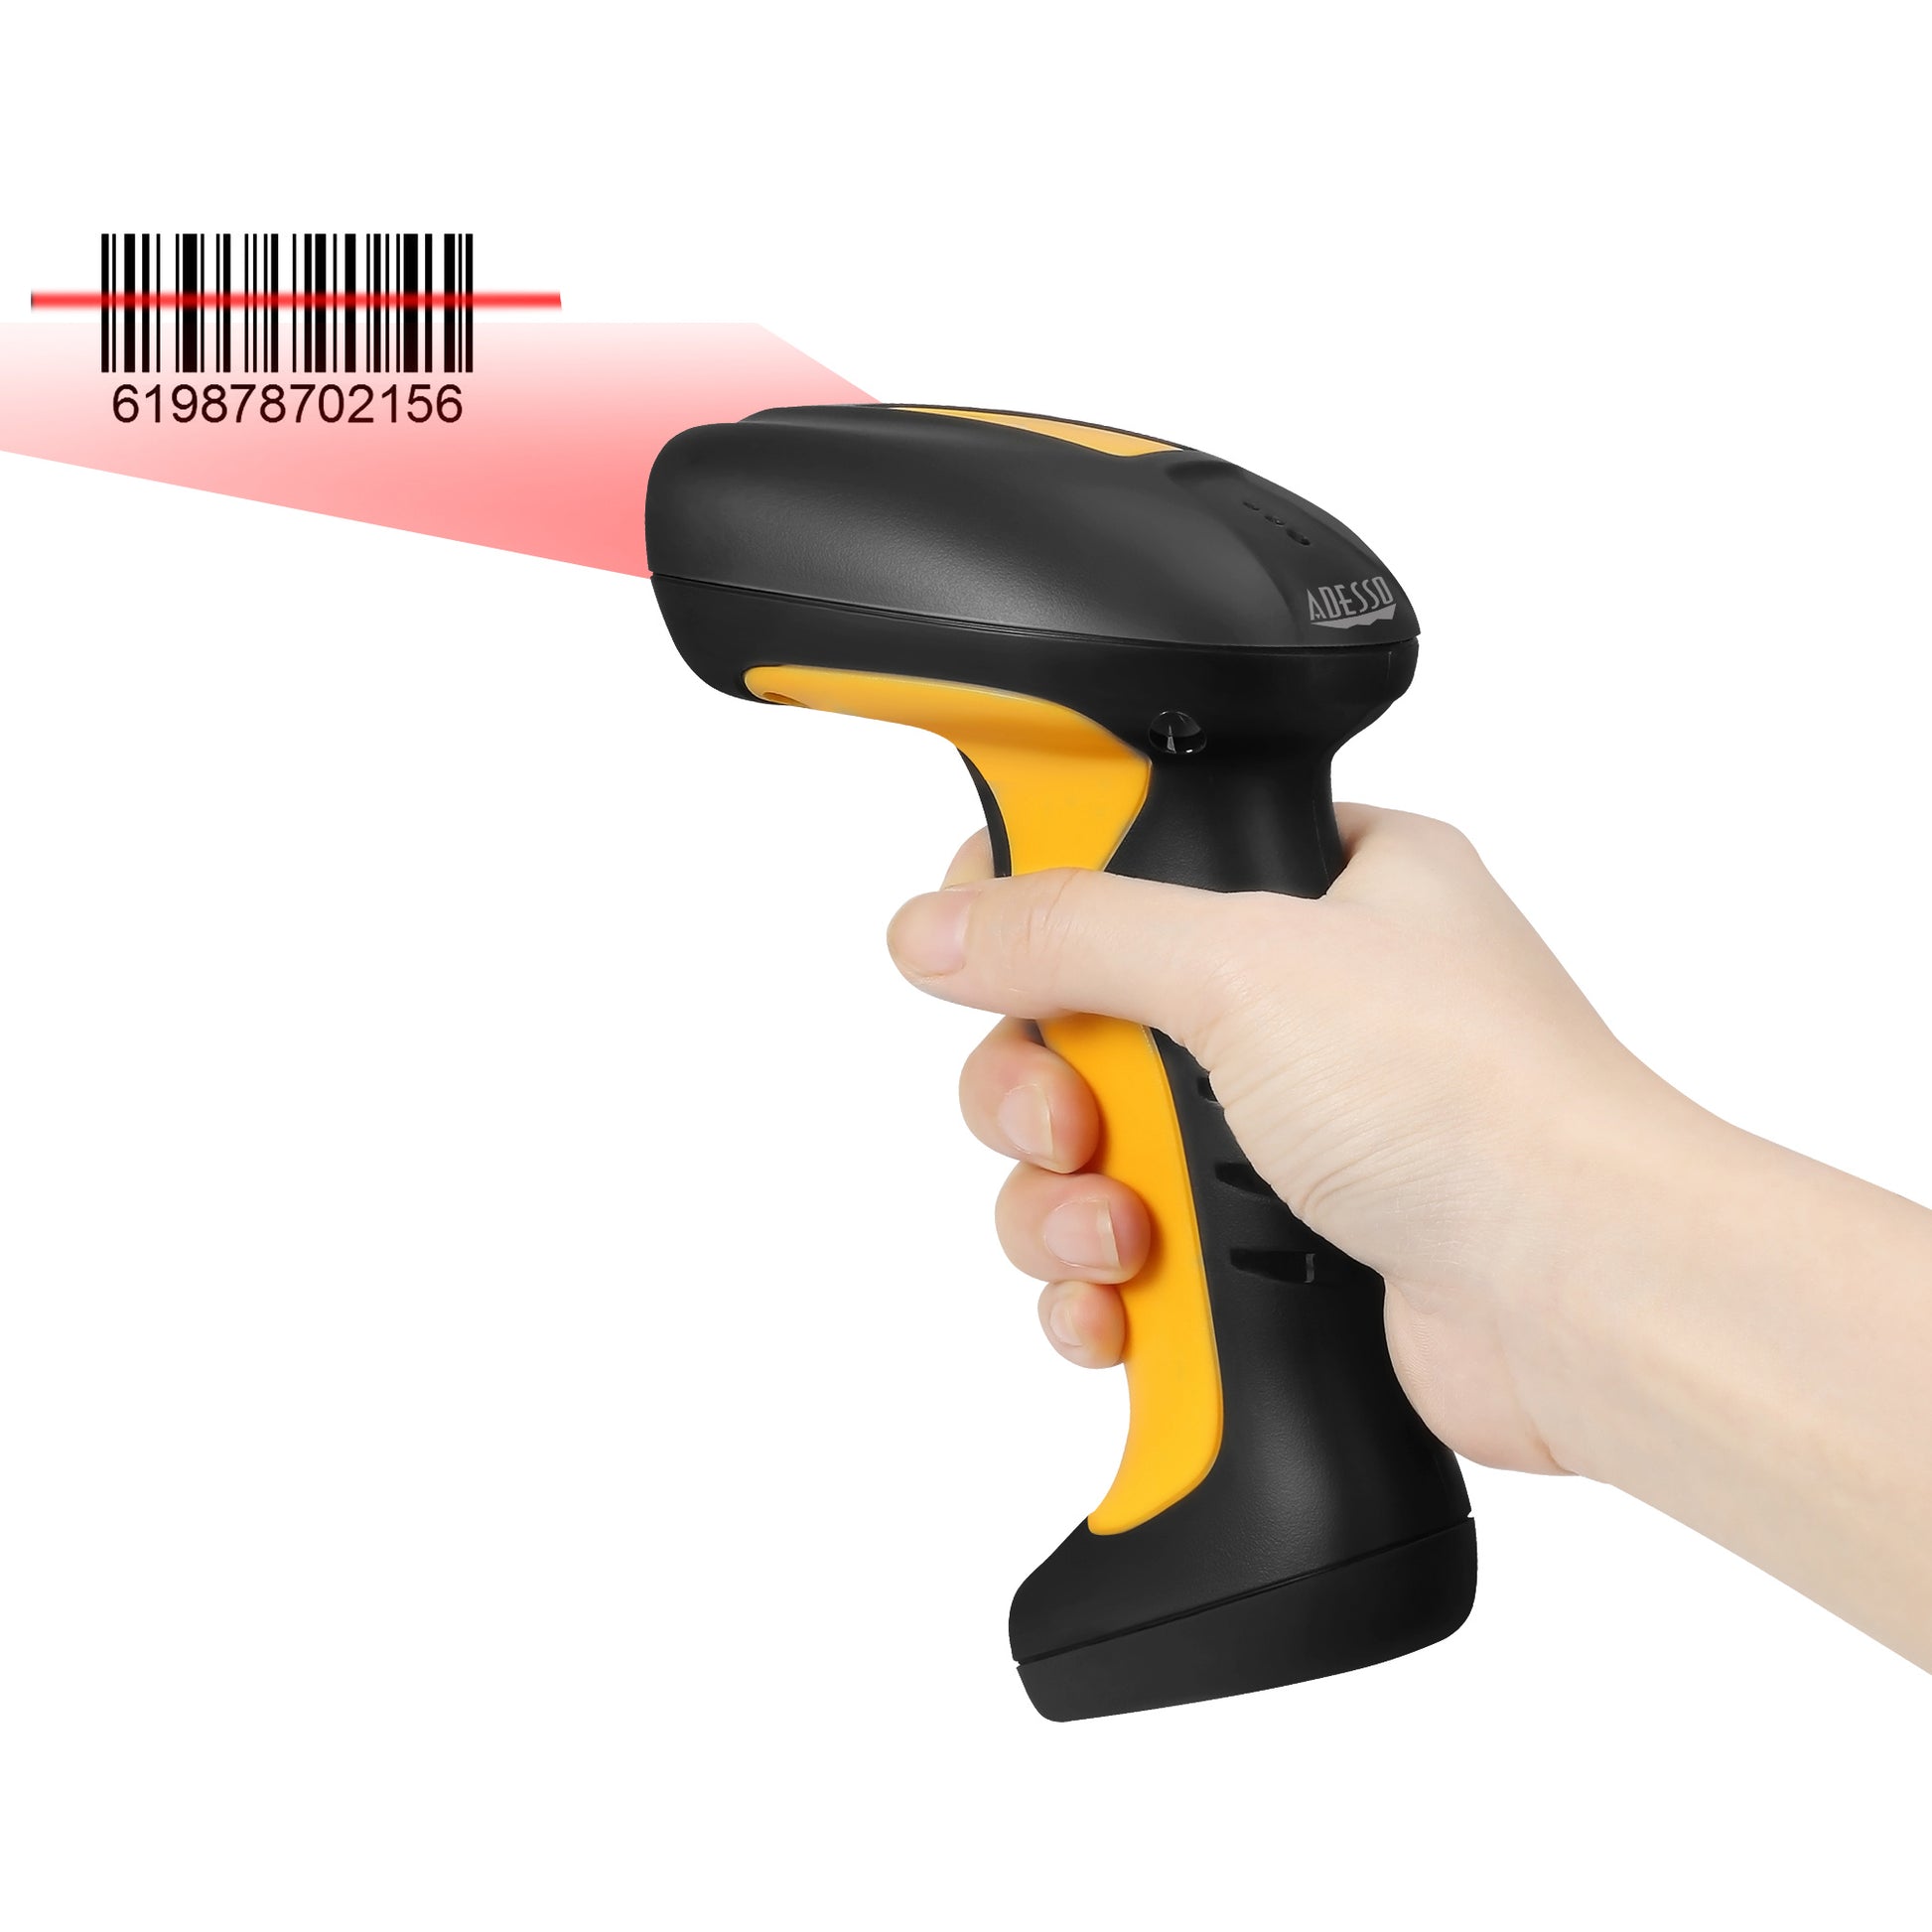 Adesso NuScan 4100B Bluetooth Antimicrobial Waterproof CCD Barcode Scanner SpadezStore